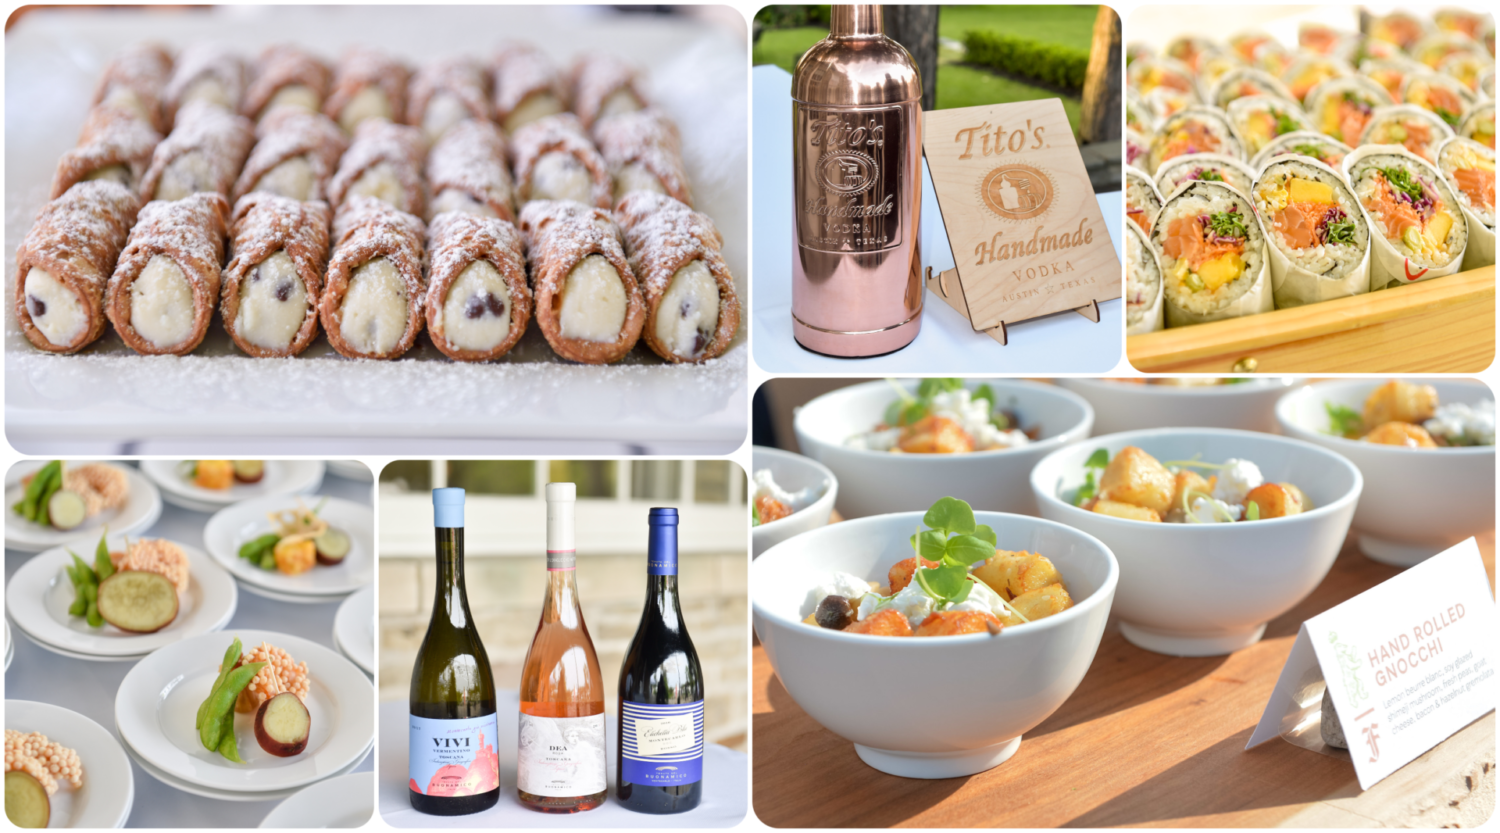 A gallery of six images, four of which are platters of food on display, one is a trio of wine bottles, and a third is a metallic rose gold bottle of vodka next to a sign.